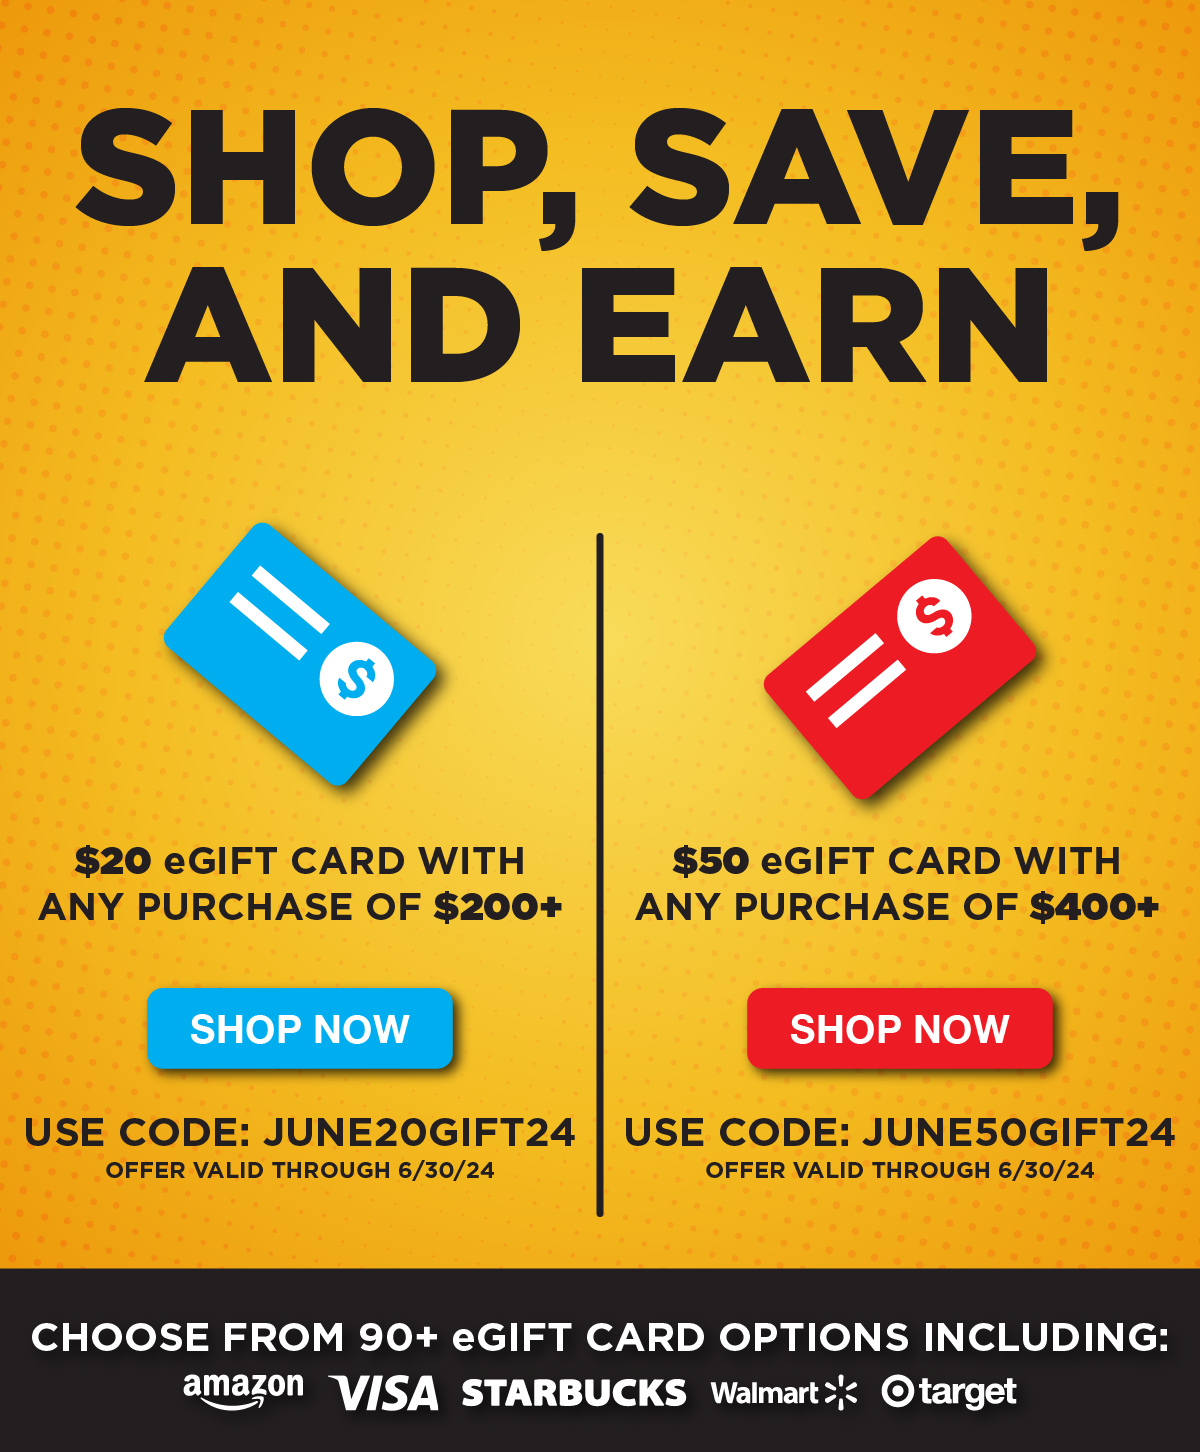 Earn eGift Cards on Qualifying Purchases